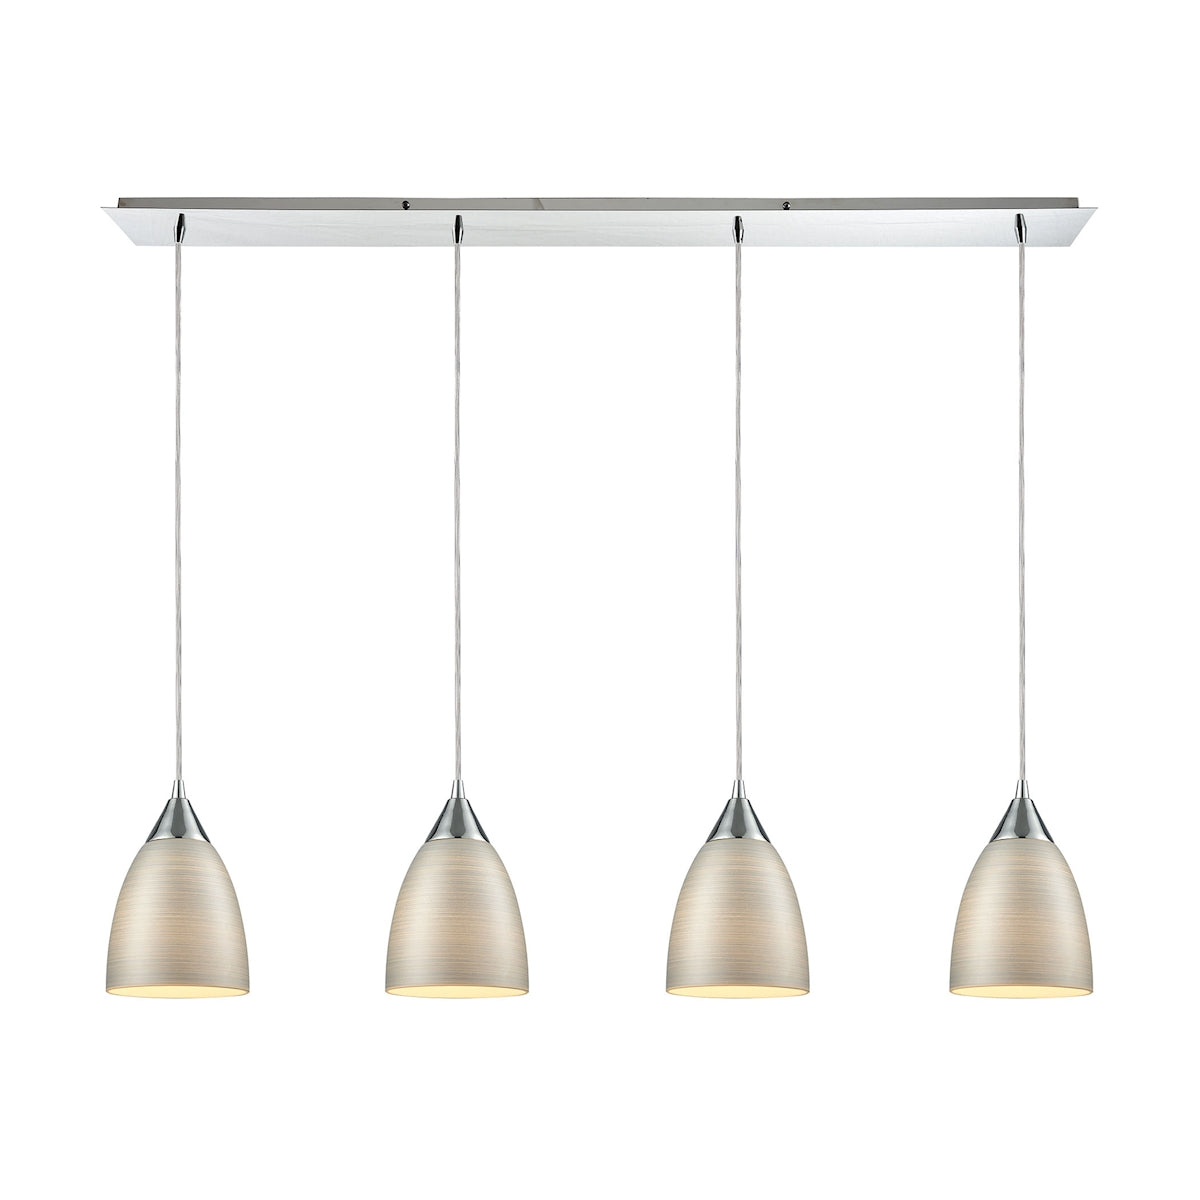 ELK Lighting 56530/4LP Merida 4-Light Linear Pendant Fixture in Polished Chrome with Silver Linen Glass